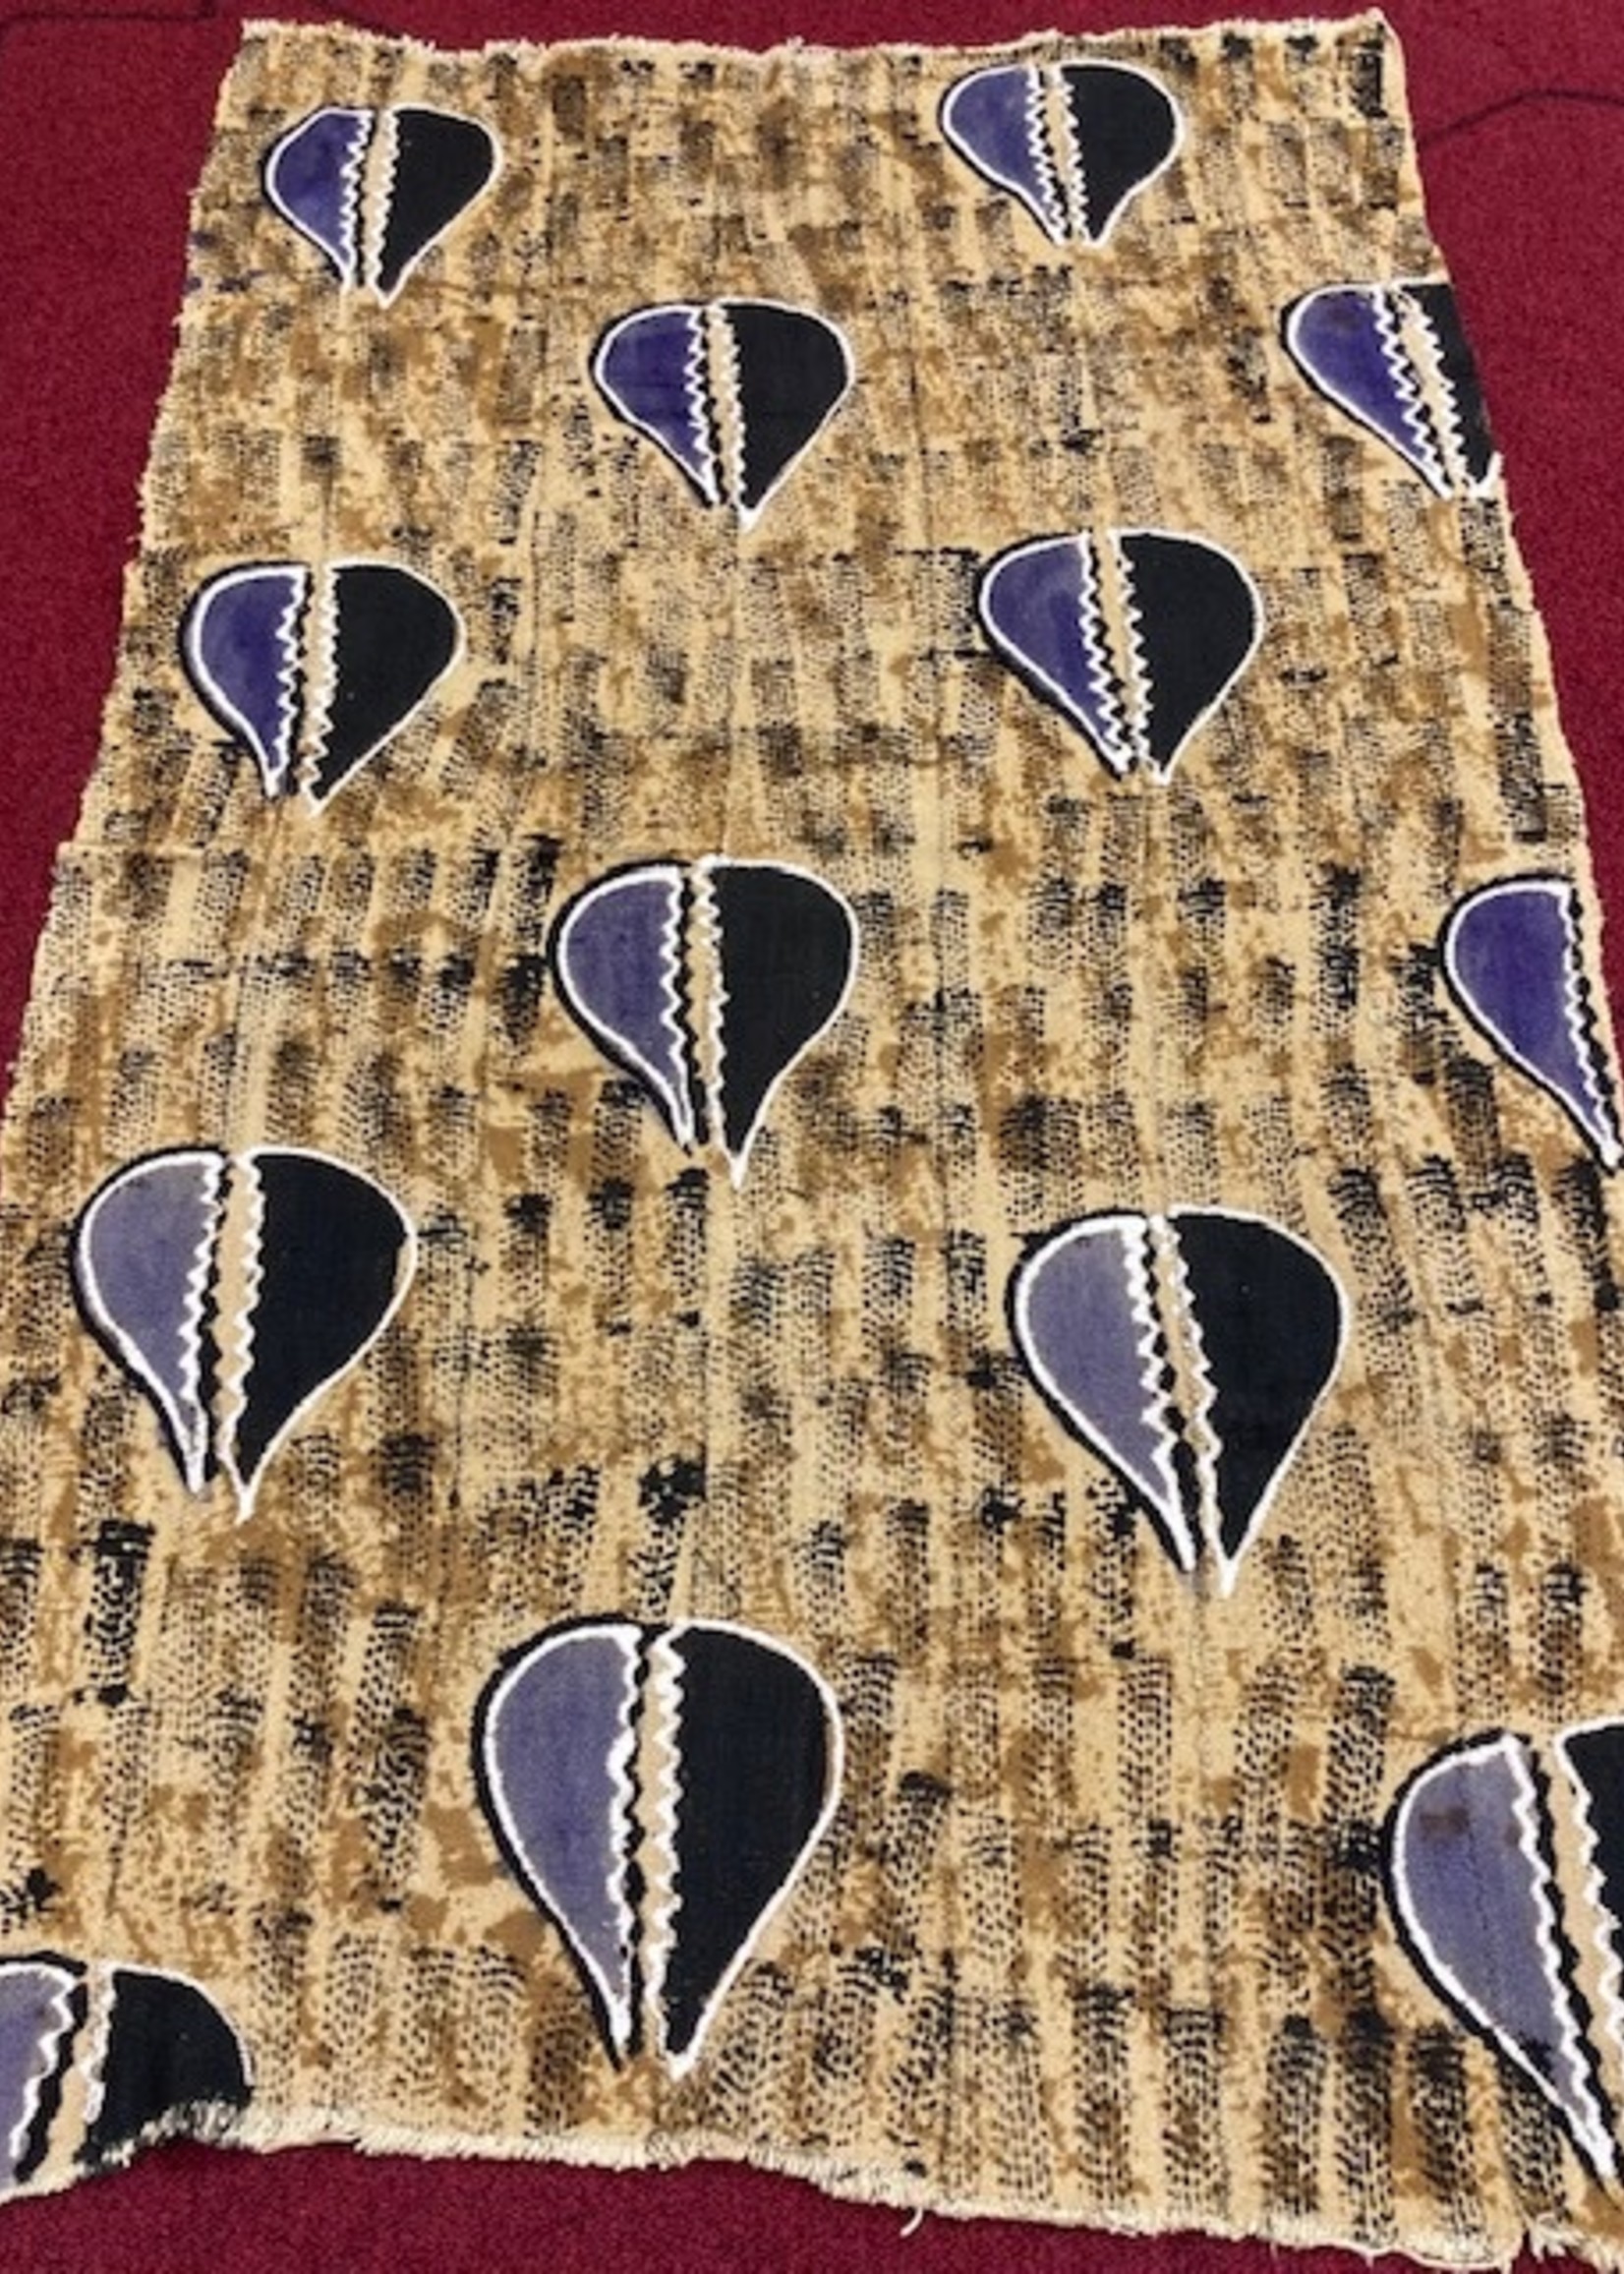 Mali Mudcloth Fabric. Handmade in Mali. 100% Cotton. Sizes vary: 38-45in Wide, 63-68in Long. For Clothing and Decorating